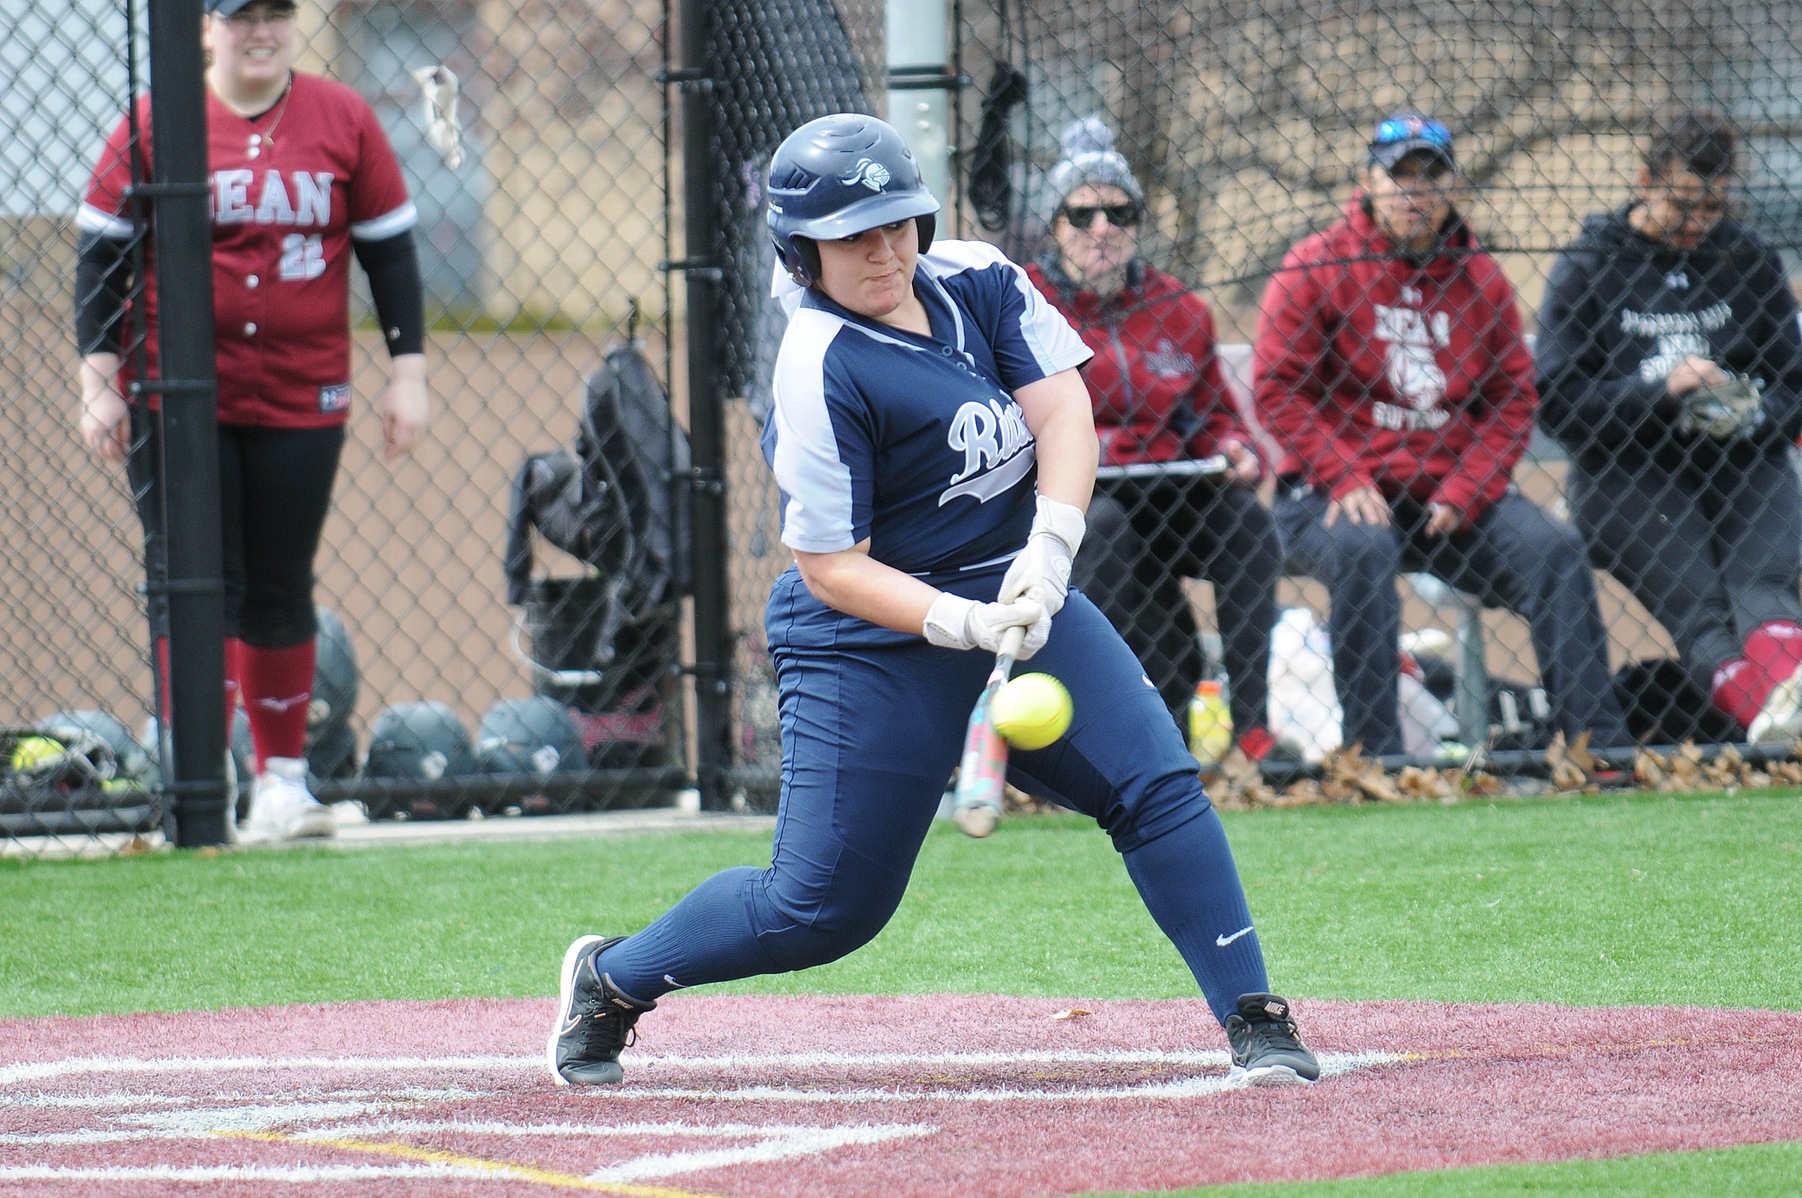 Softball: Terriers take two from Raiders, 5-1 and 3-1.